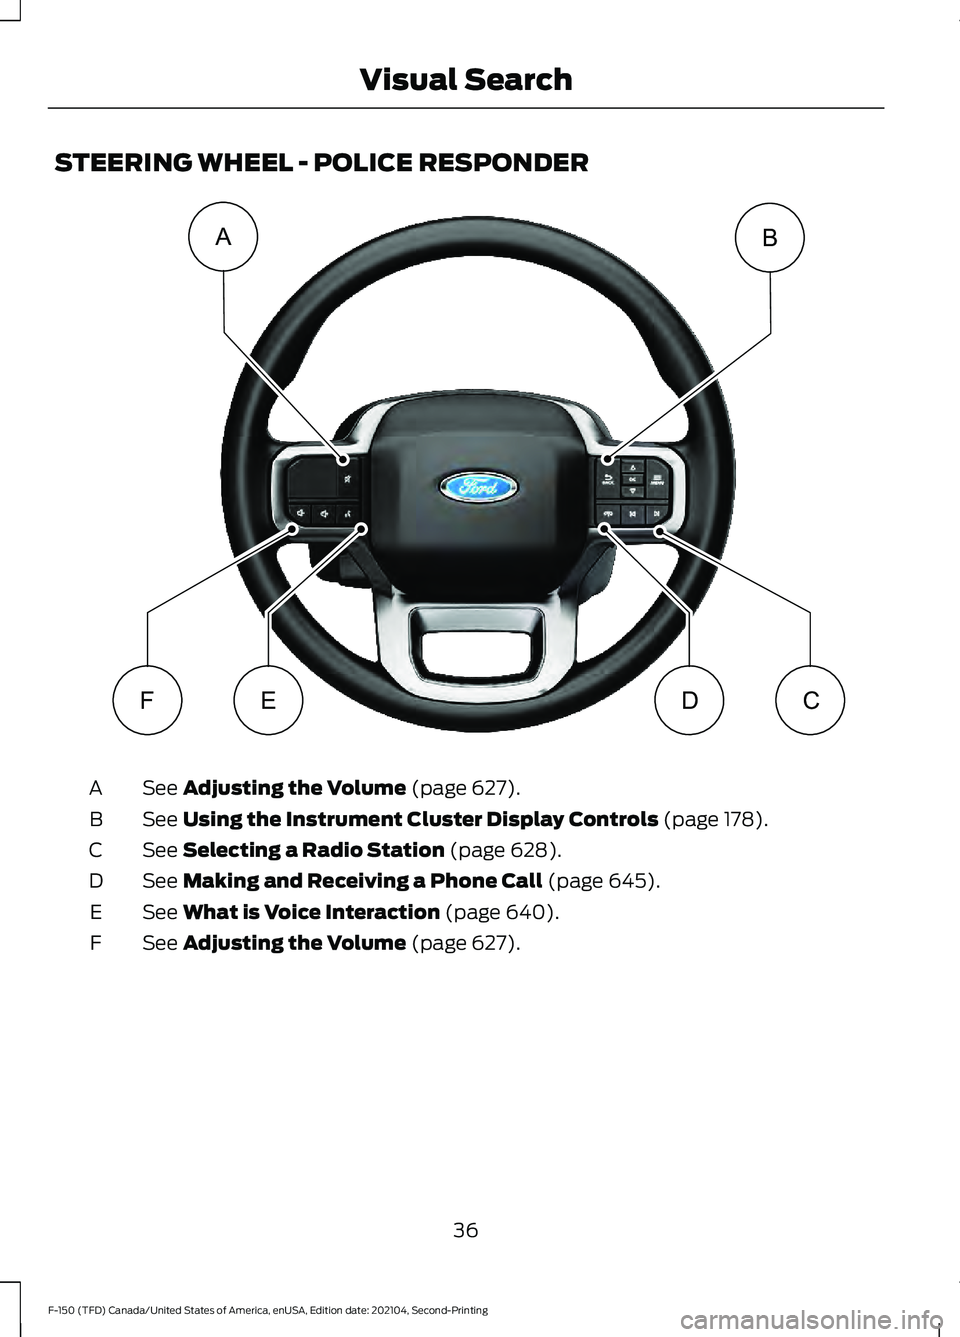 FORD F-150 2021  Owners Manual STEERING WHEEL - POLICE RESPONDER
See Adjusting the Volume (page 627).
A
See 
Using the Instrument Cluster Display Controls (page 178).
B
See 
Selecting a Radio Station (page 628).
C
See 
Making and R